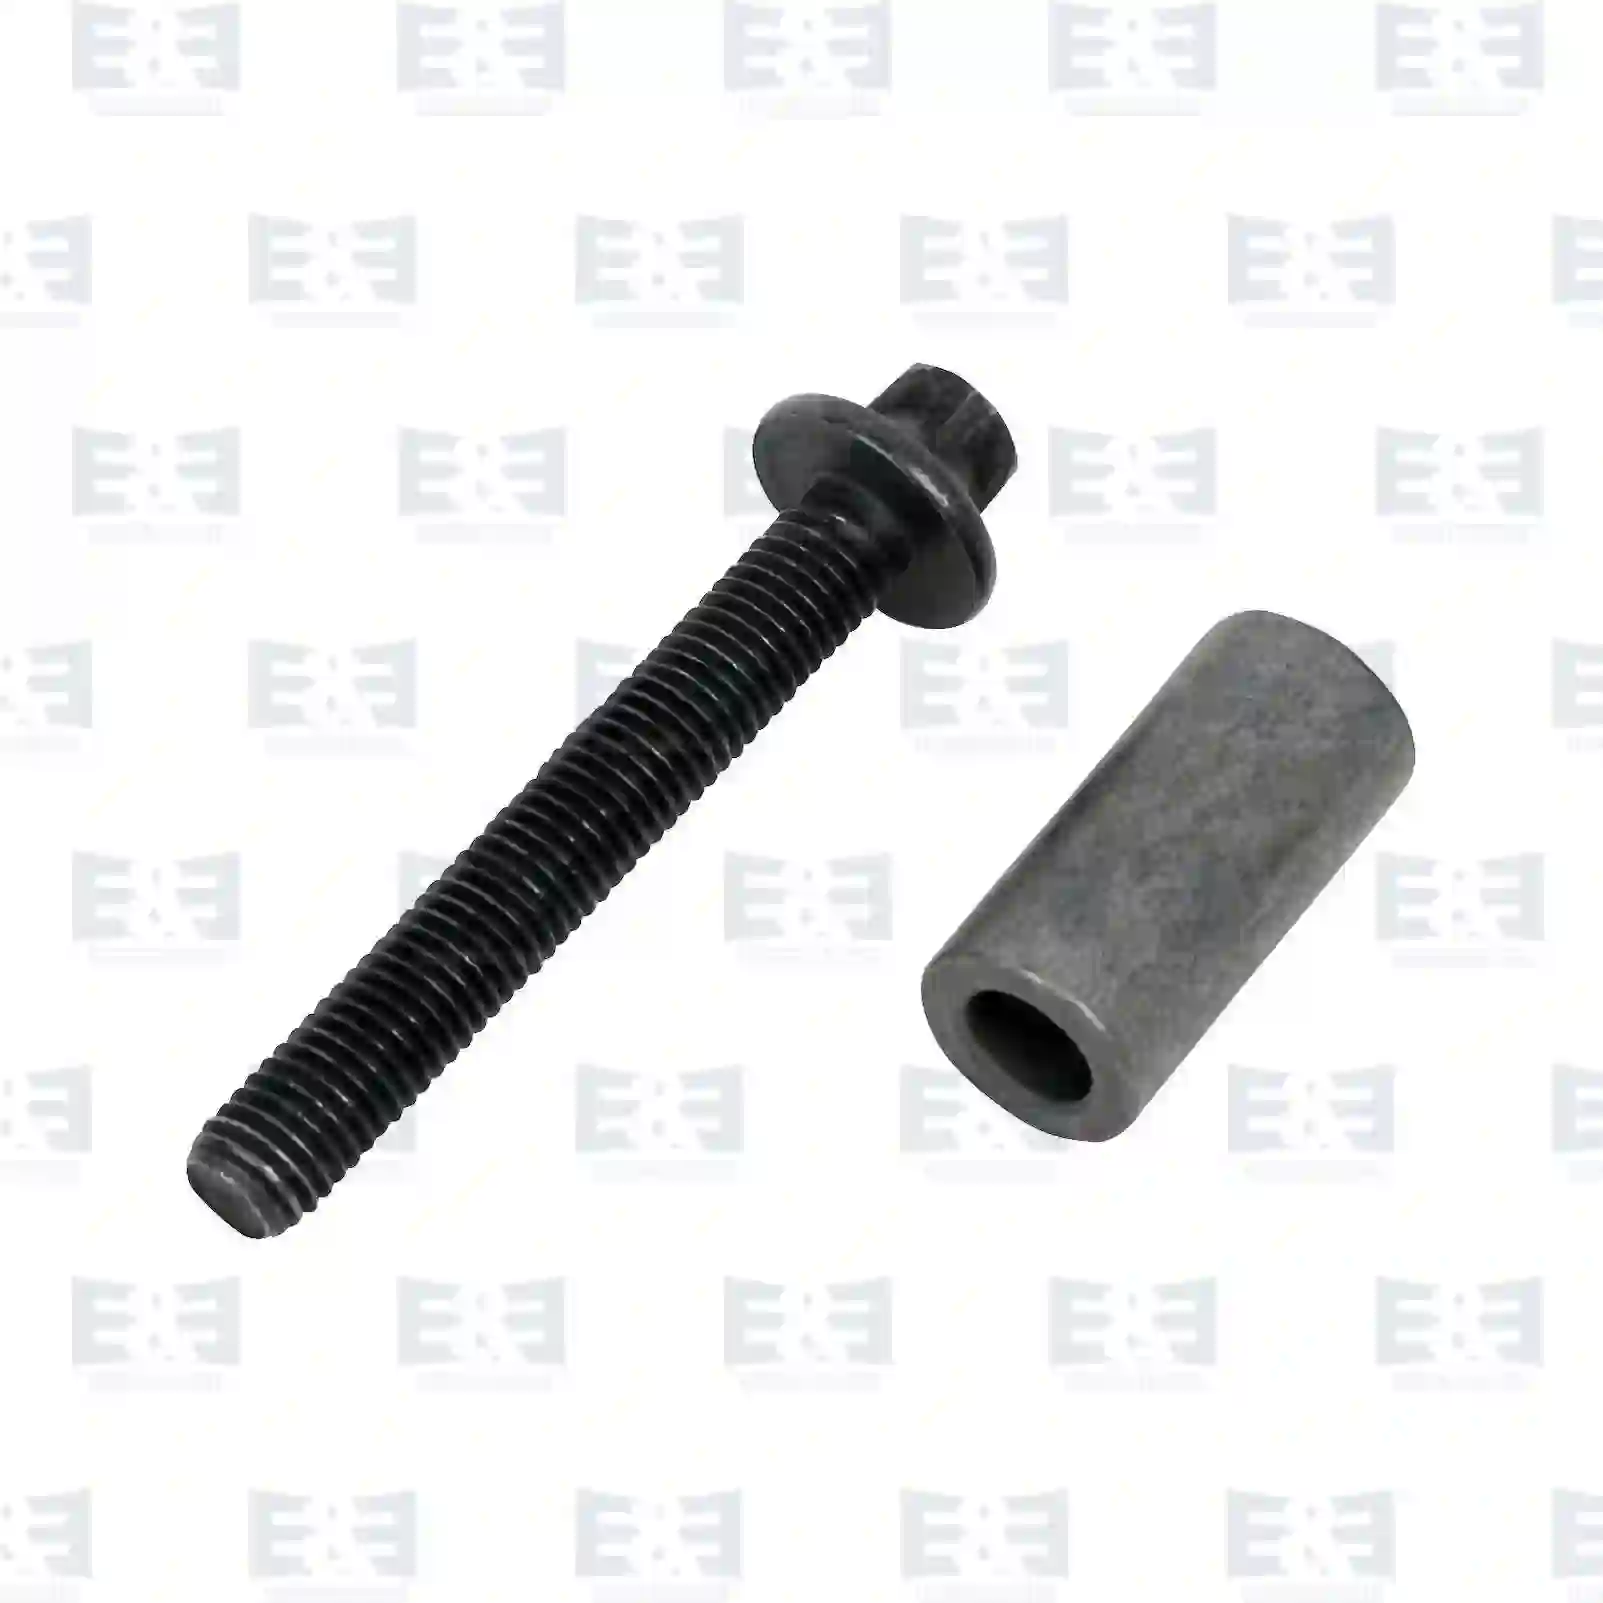 Screw with sleeve, exhaust manifold, 2E2206210, 1859636, ZG01977-0008, ||  2E2206210 E&E Truck Spare Parts | Truck Spare Parts, Auotomotive Spare Parts Screw with sleeve, exhaust manifold, 2E2206210, 1859636, ZG01977-0008, ||  2E2206210 E&E Truck Spare Parts | Truck Spare Parts, Auotomotive Spare Parts